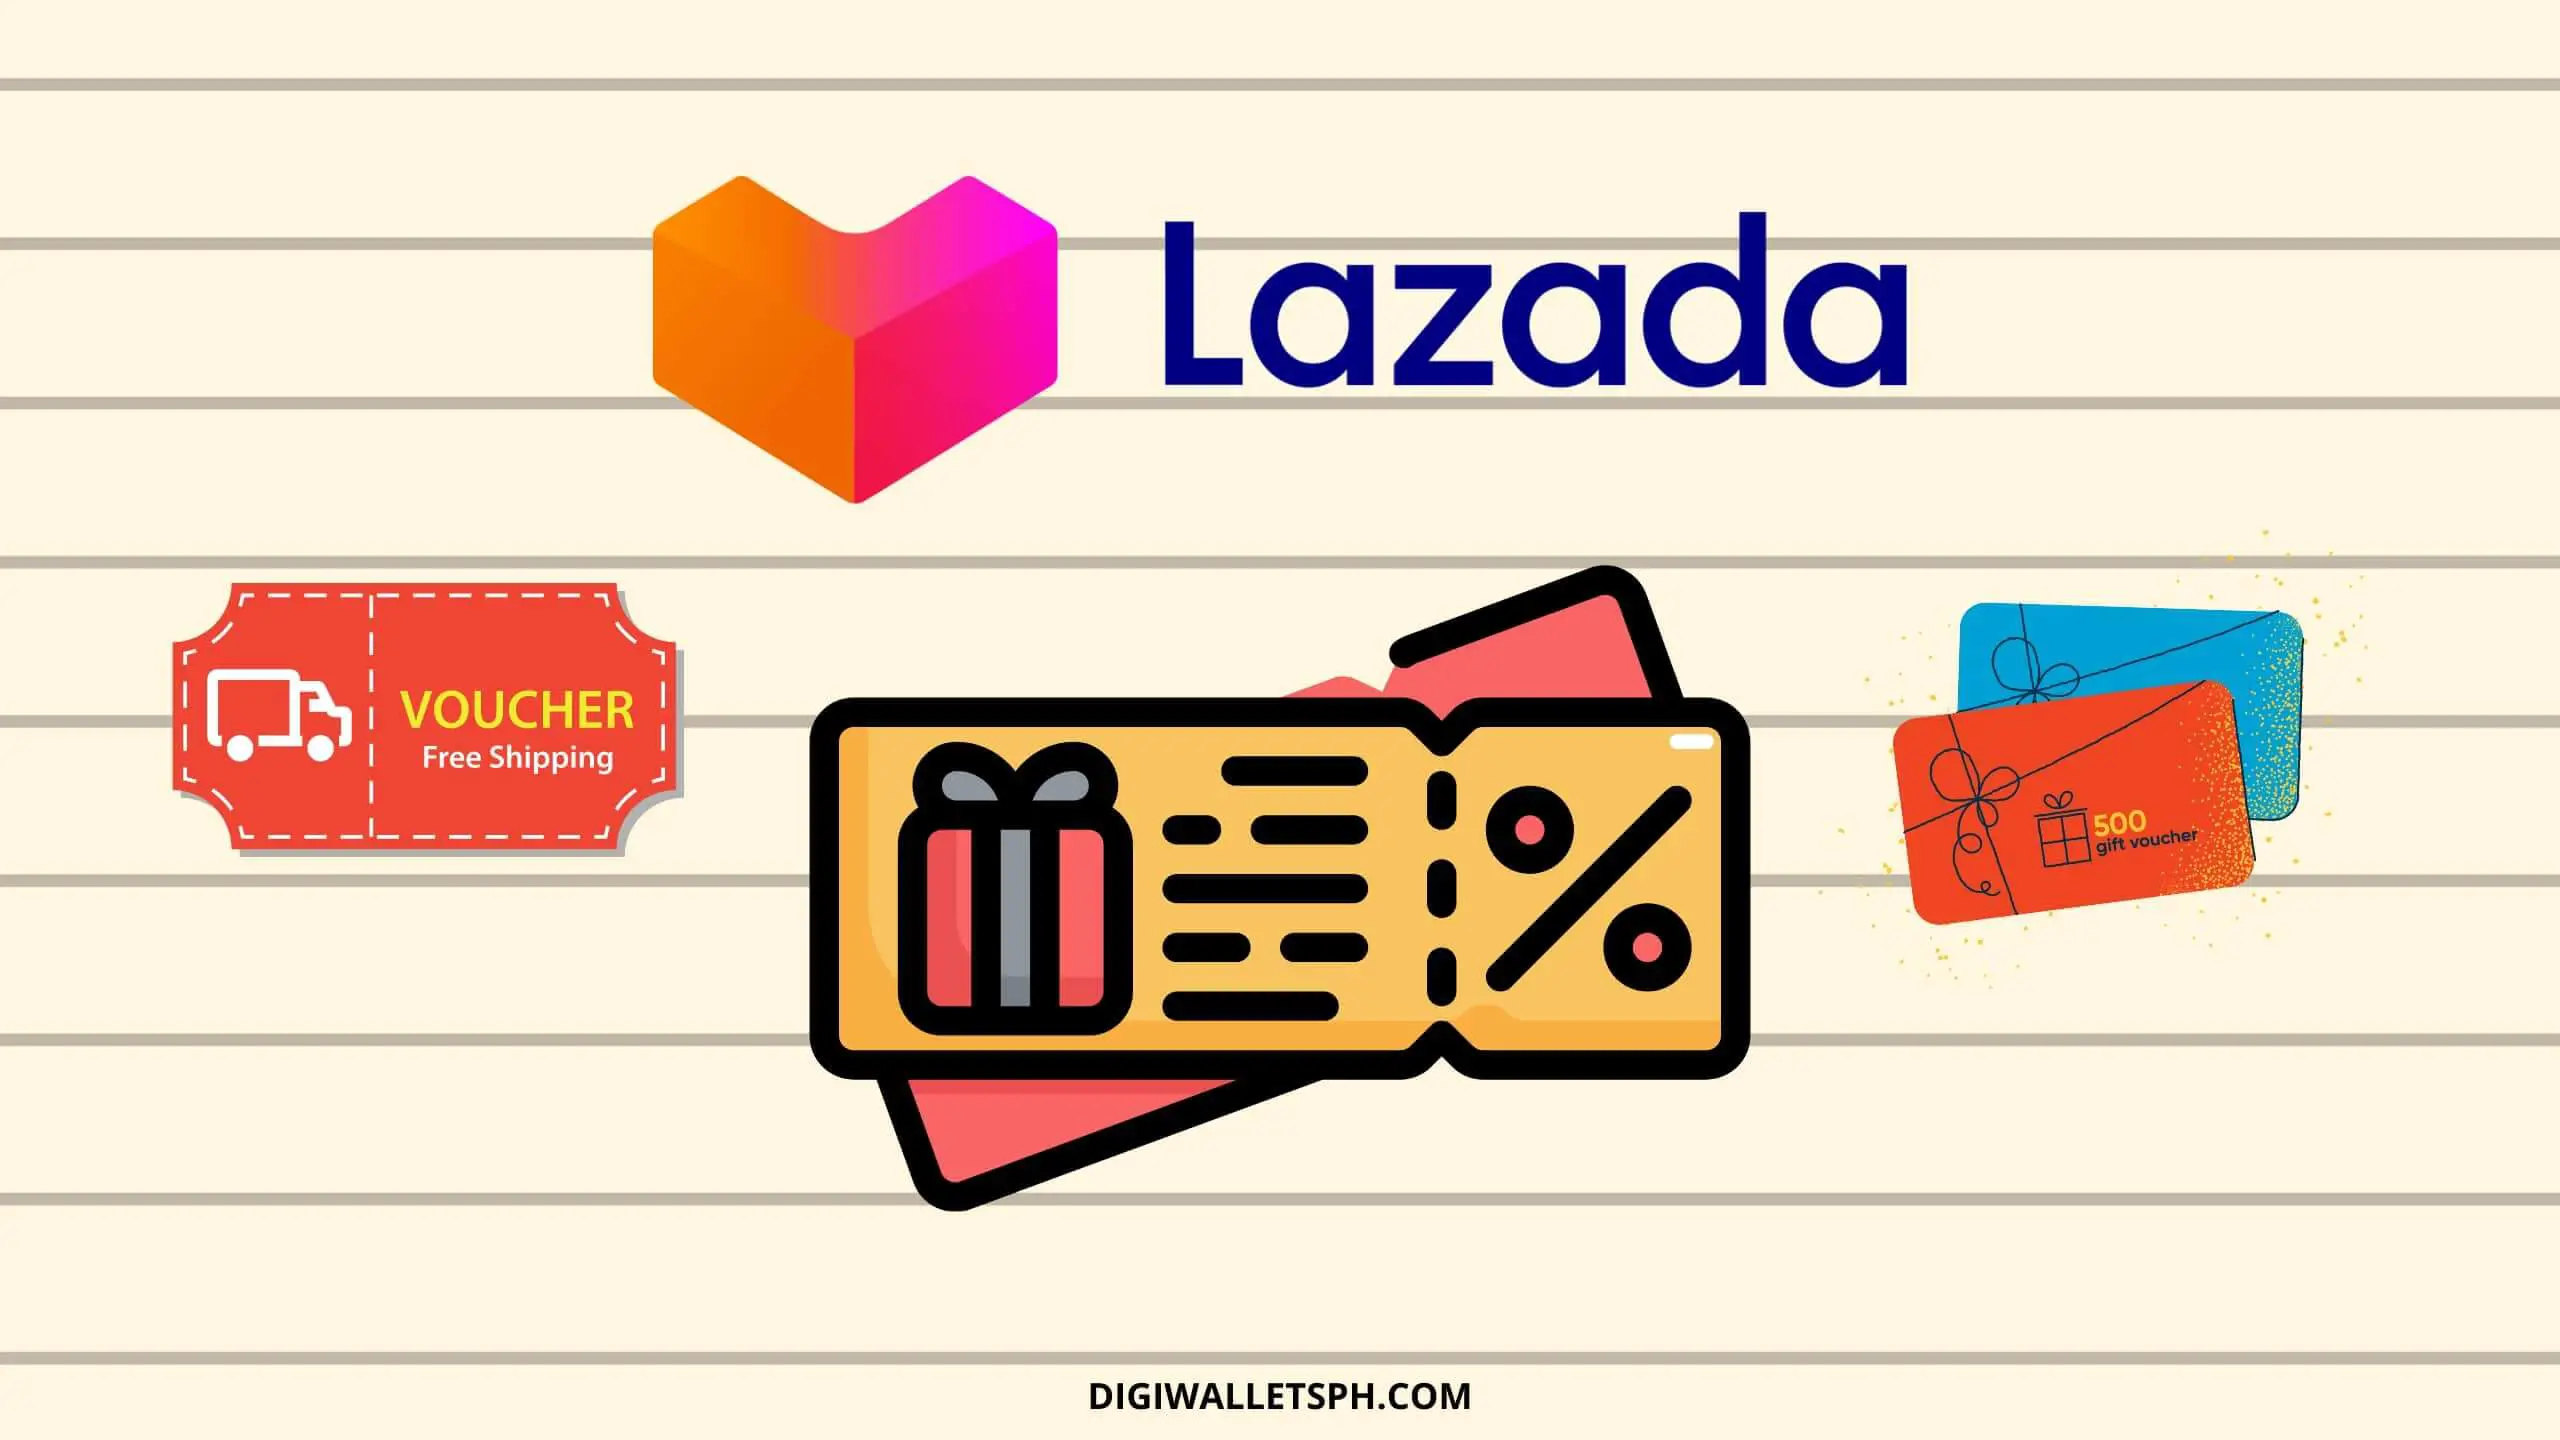 How to use voucher in Lazada